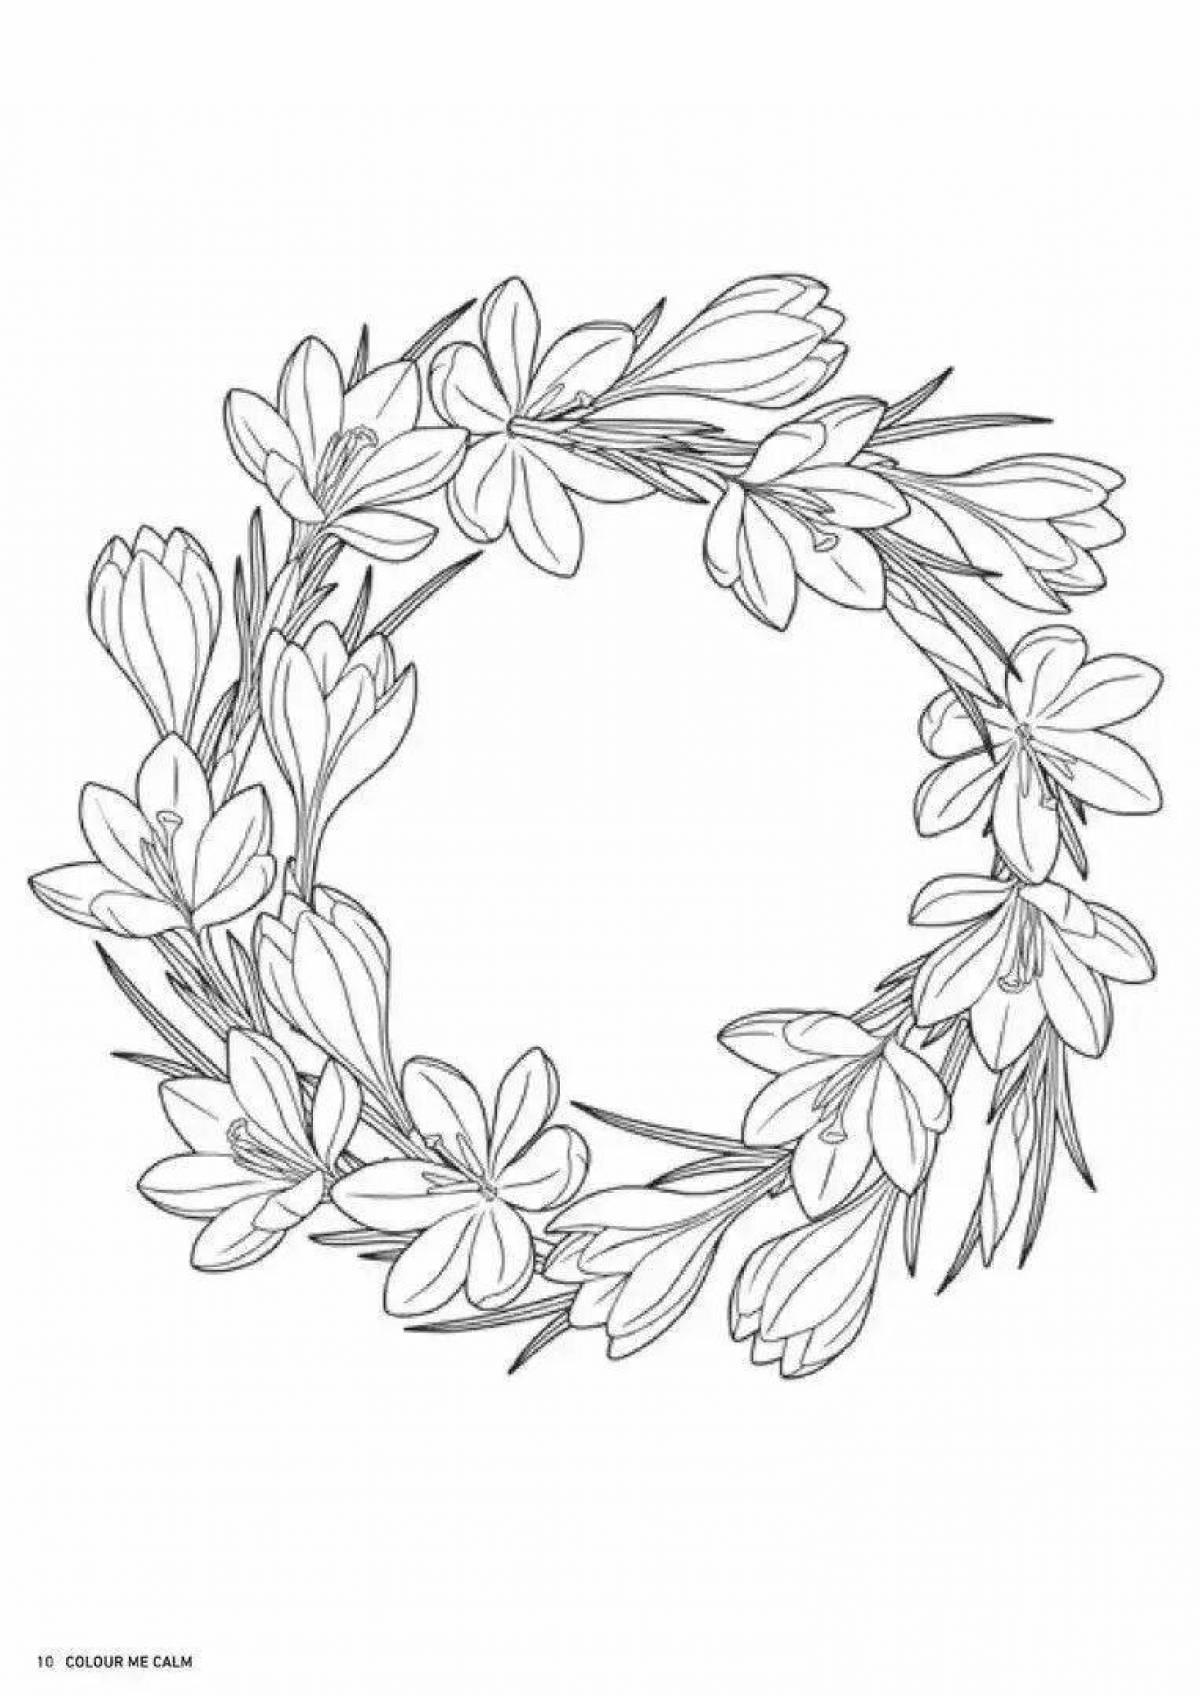 Coloring page beautiful wreath of flowers